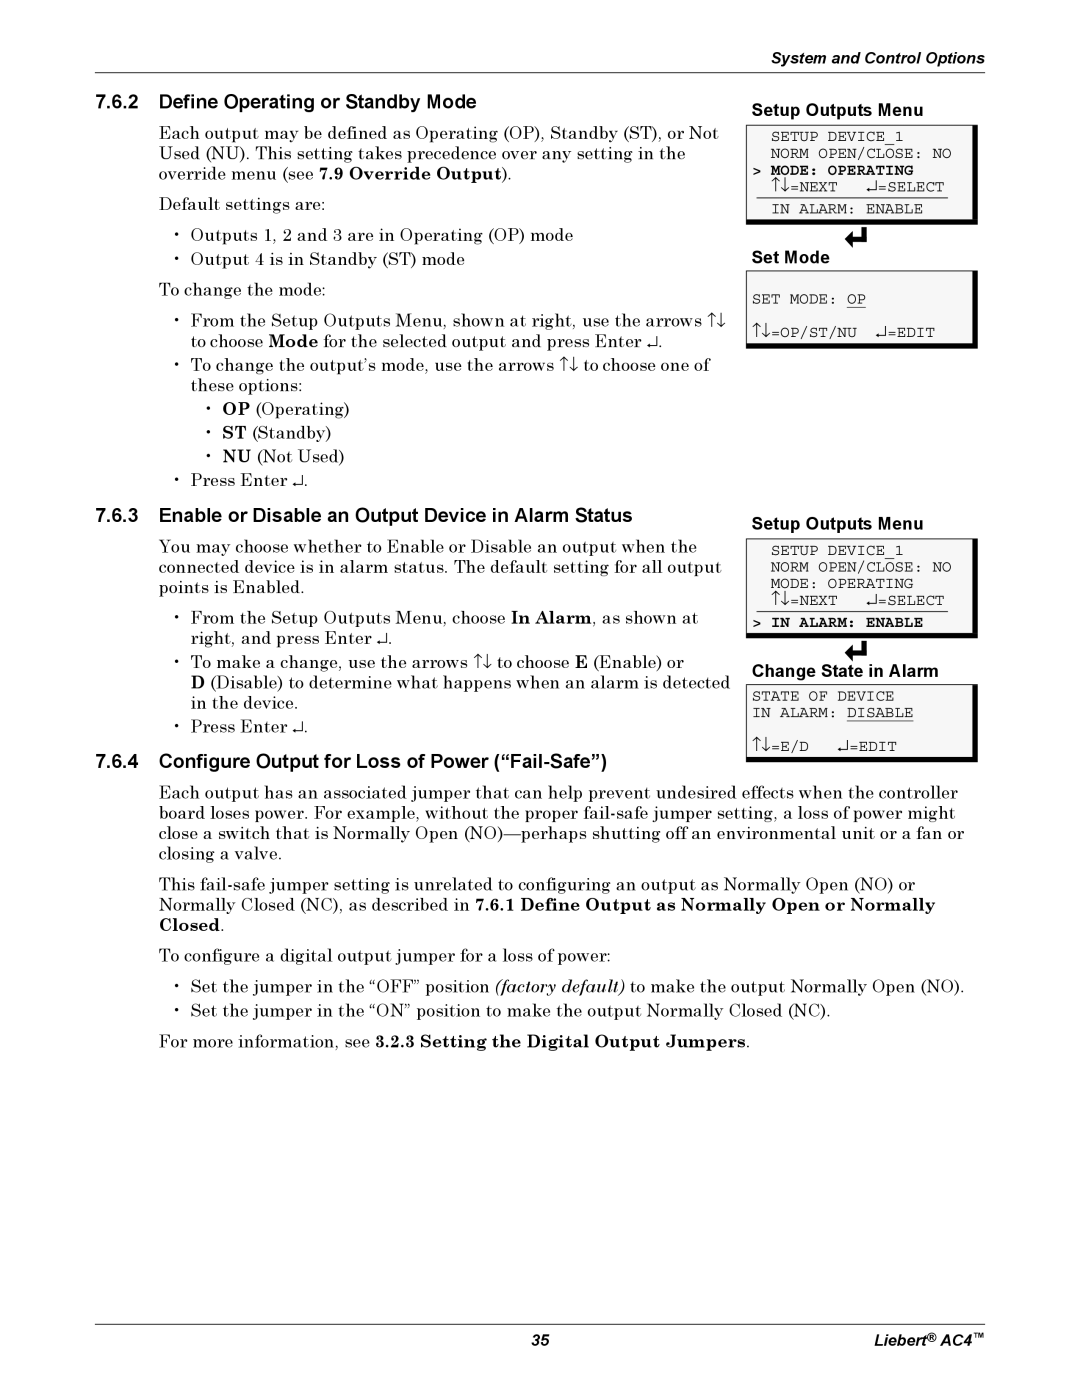 Emerson AC4 user manual 7.6.2Define Operating or Standby Mode 